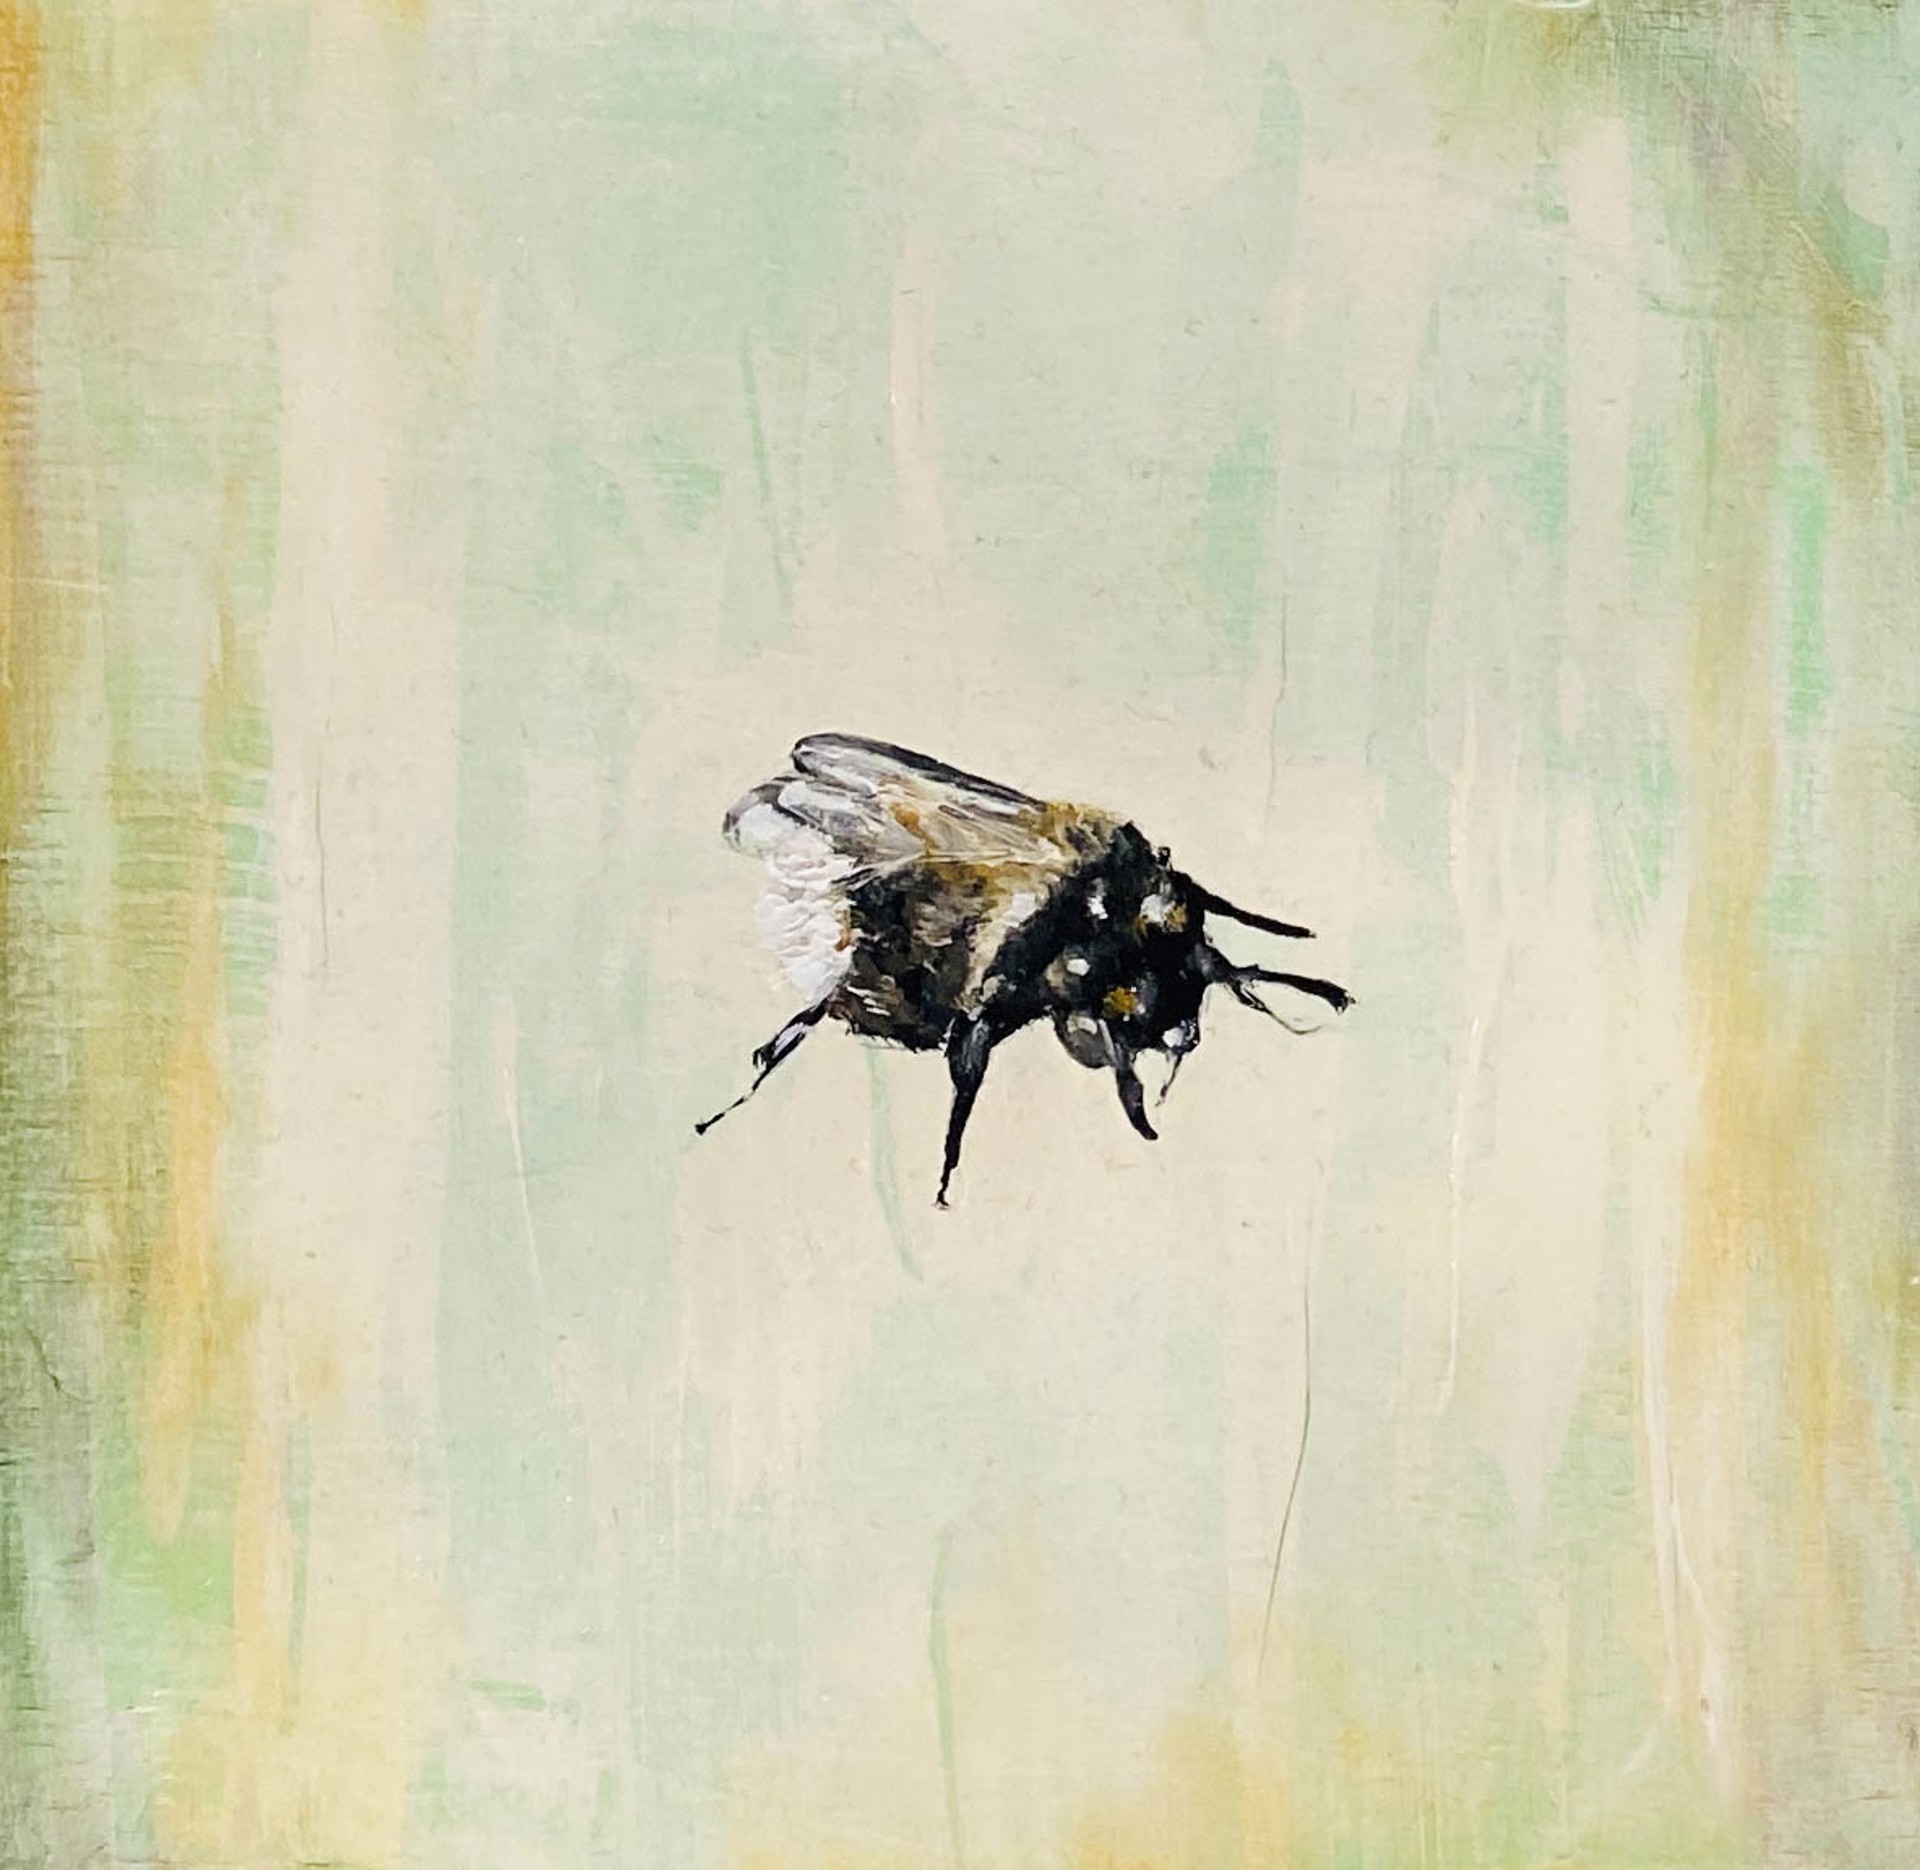 Original Oil Painting Featuring A Single Bumble Bee Over Abstract Background